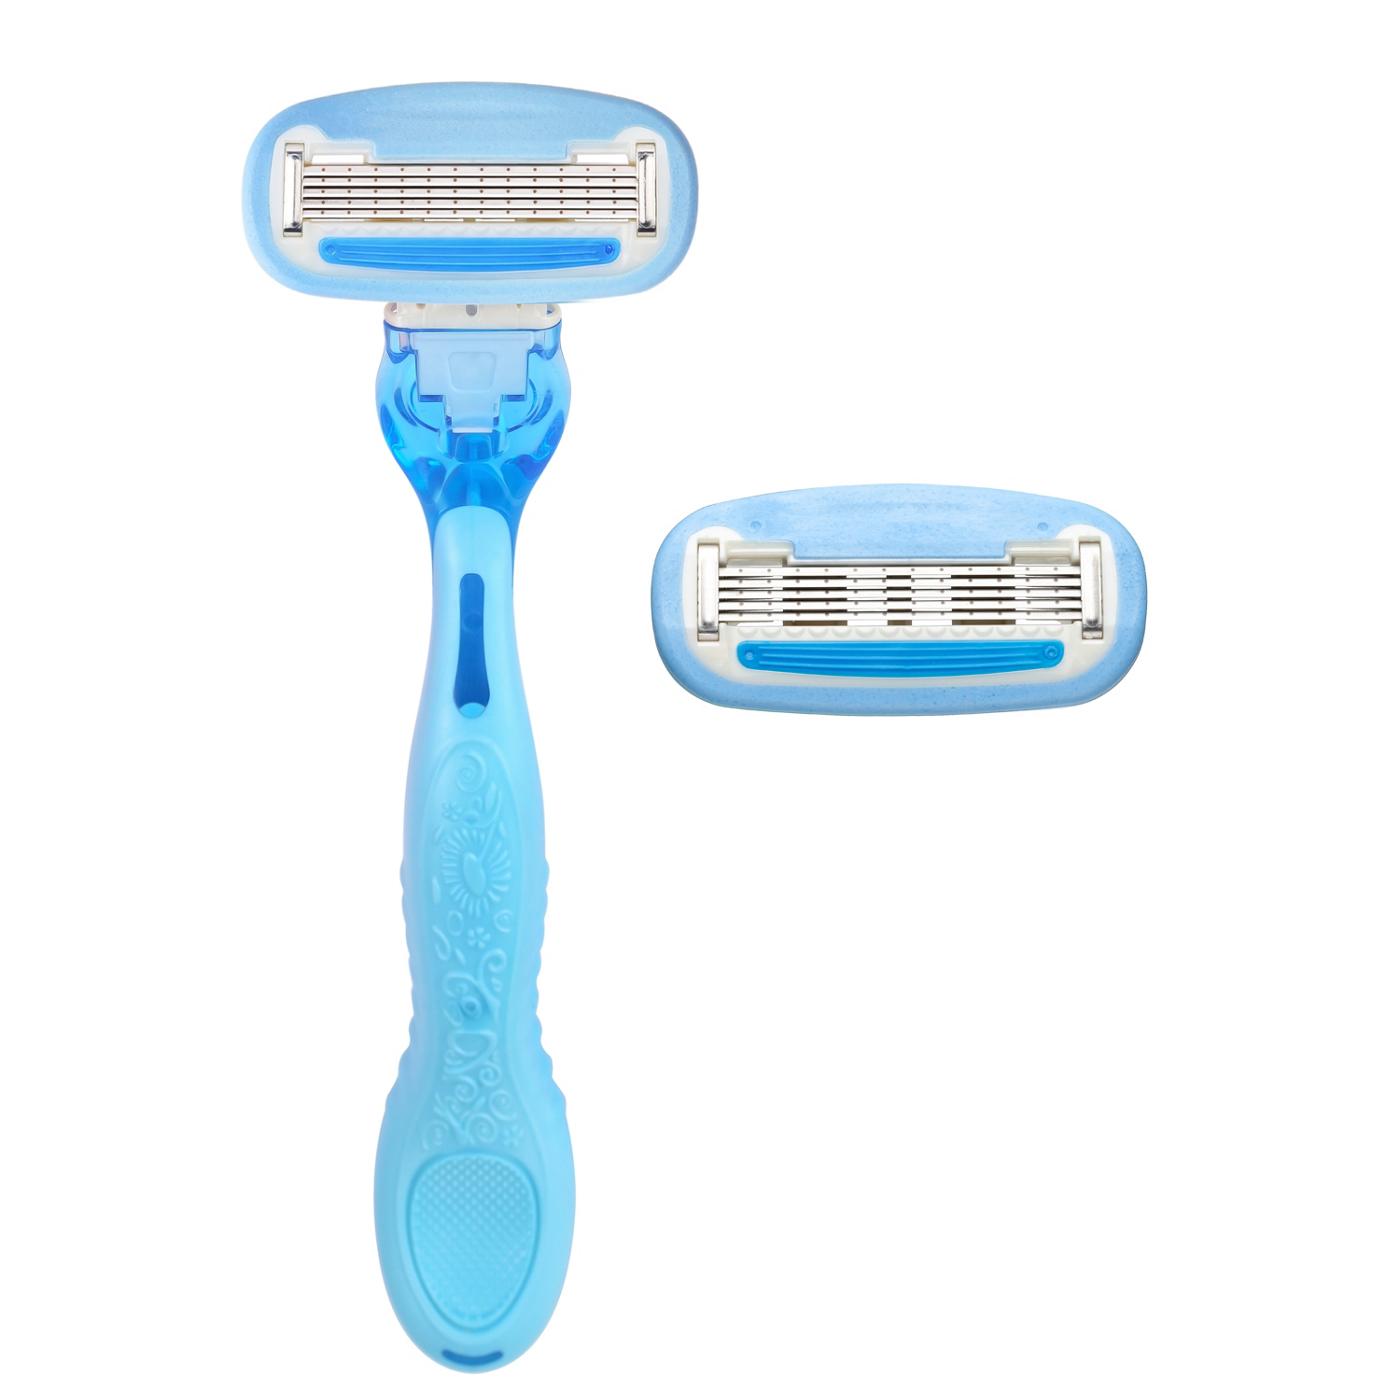 Hill Country Essentials Simply Silky 5 Women's Razor With 2 Cartridges; image 5 of 5